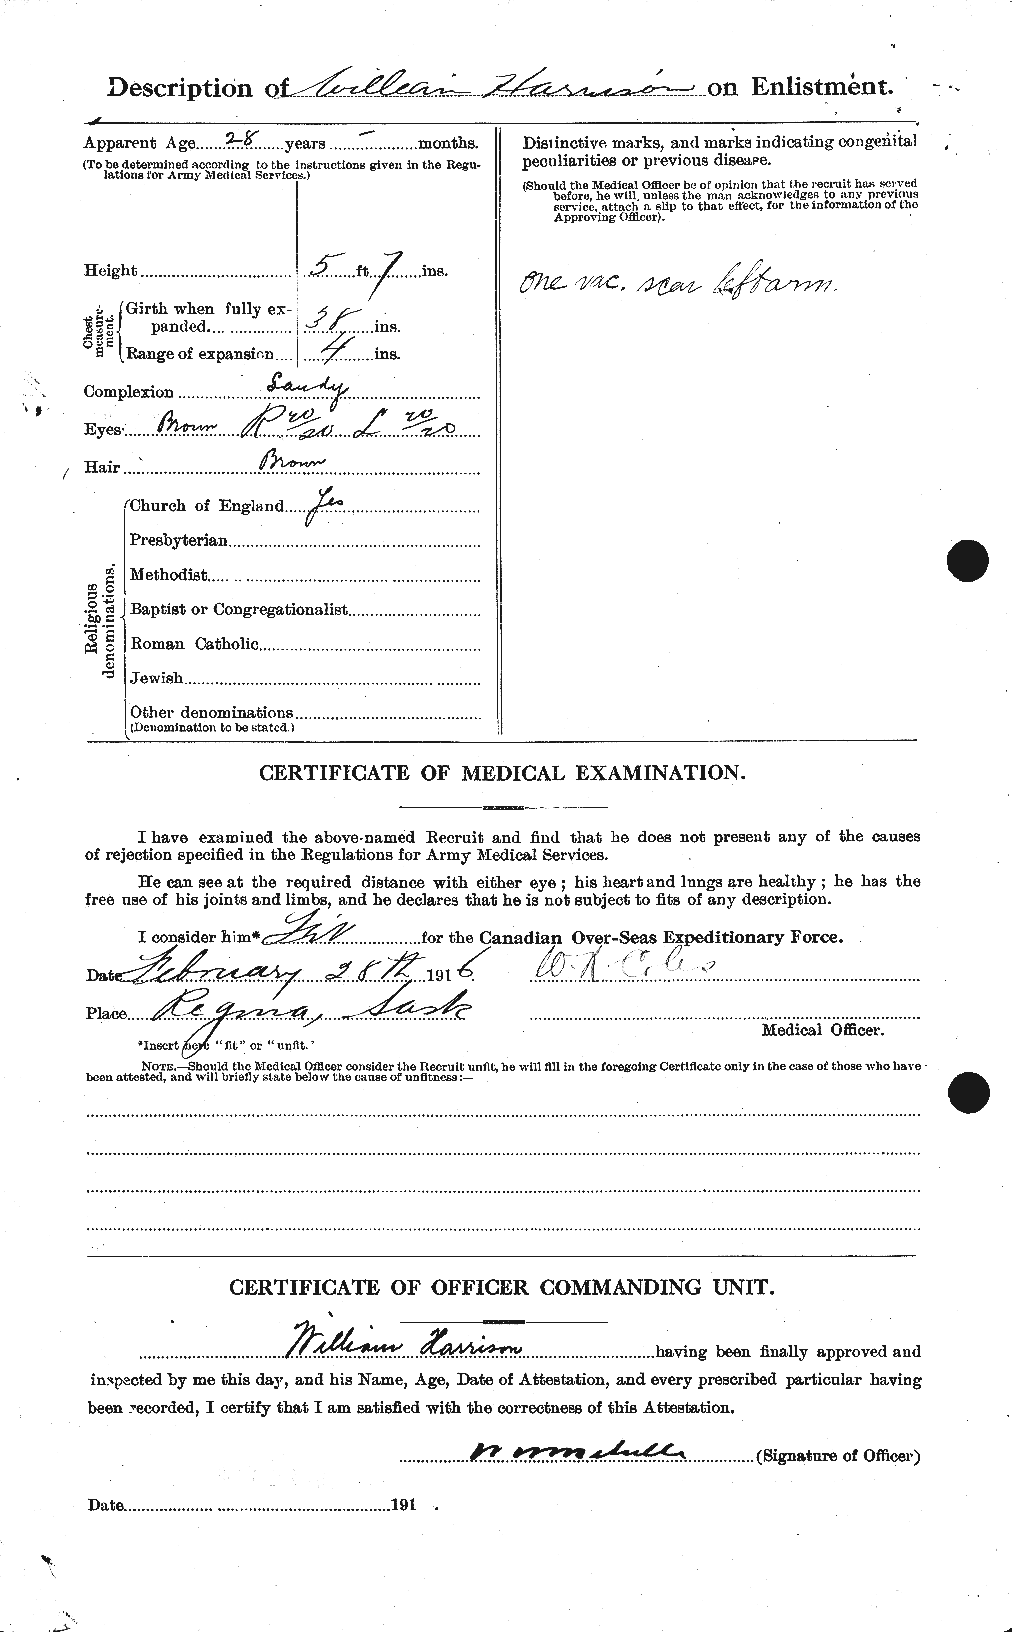 Personnel Records of the First World War - CEF 379955b